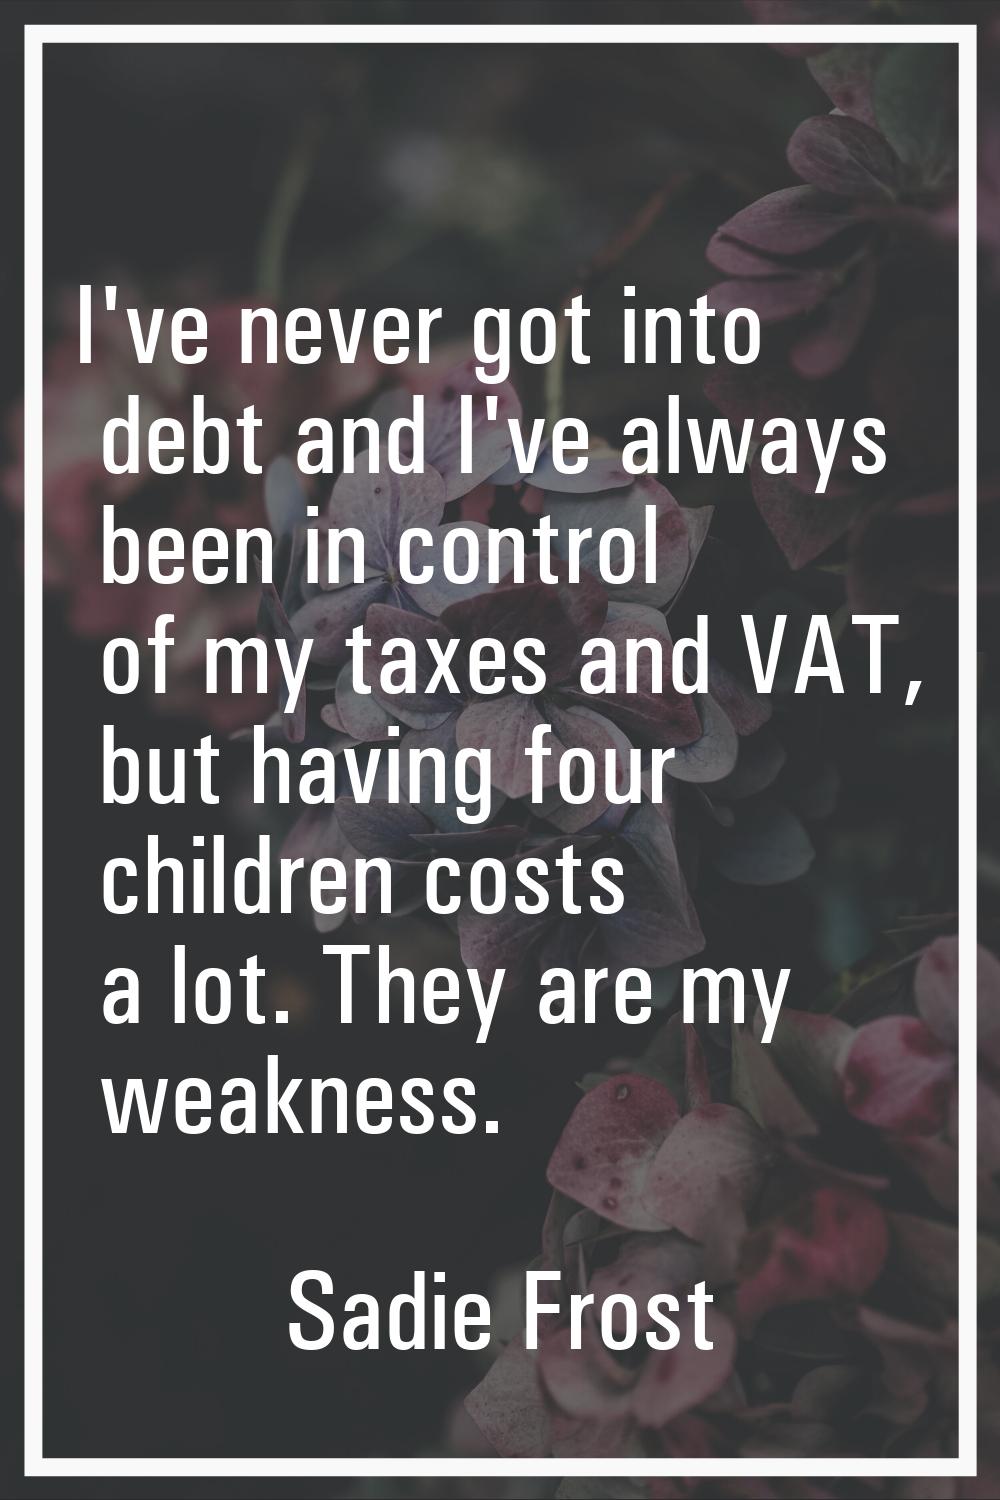 I've never got into debt and I've always been in control of my taxes and VAT, but having four child